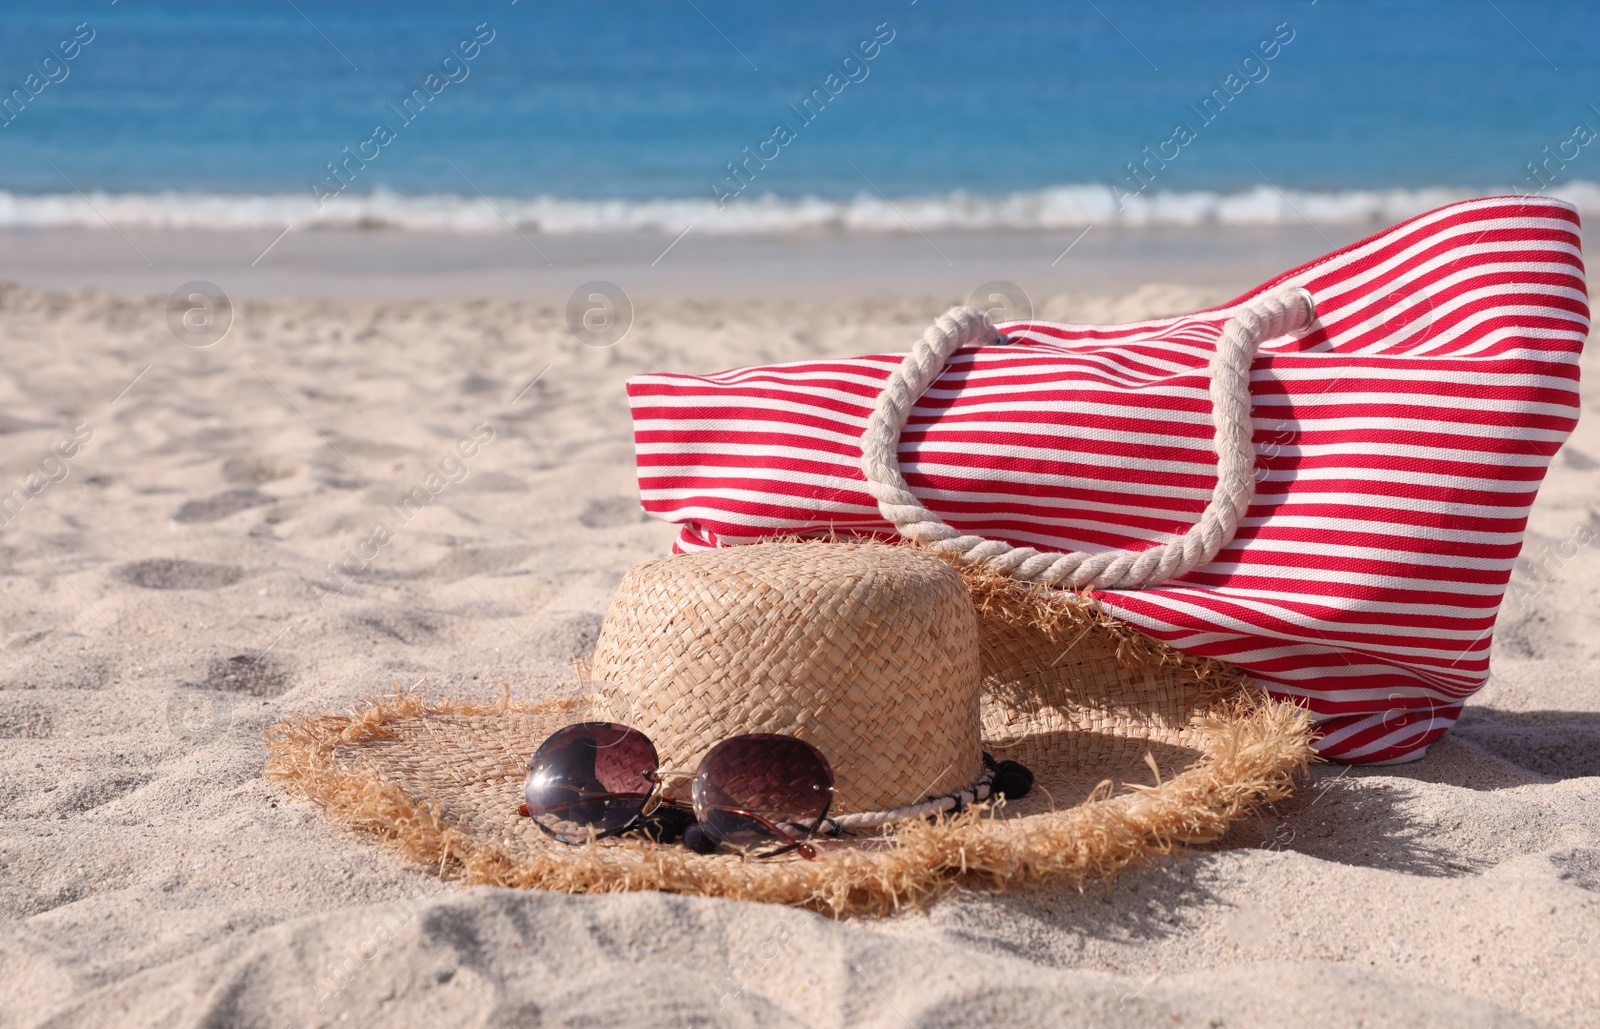 Photo of Straw hat with sunglasses and bag on sandy beach